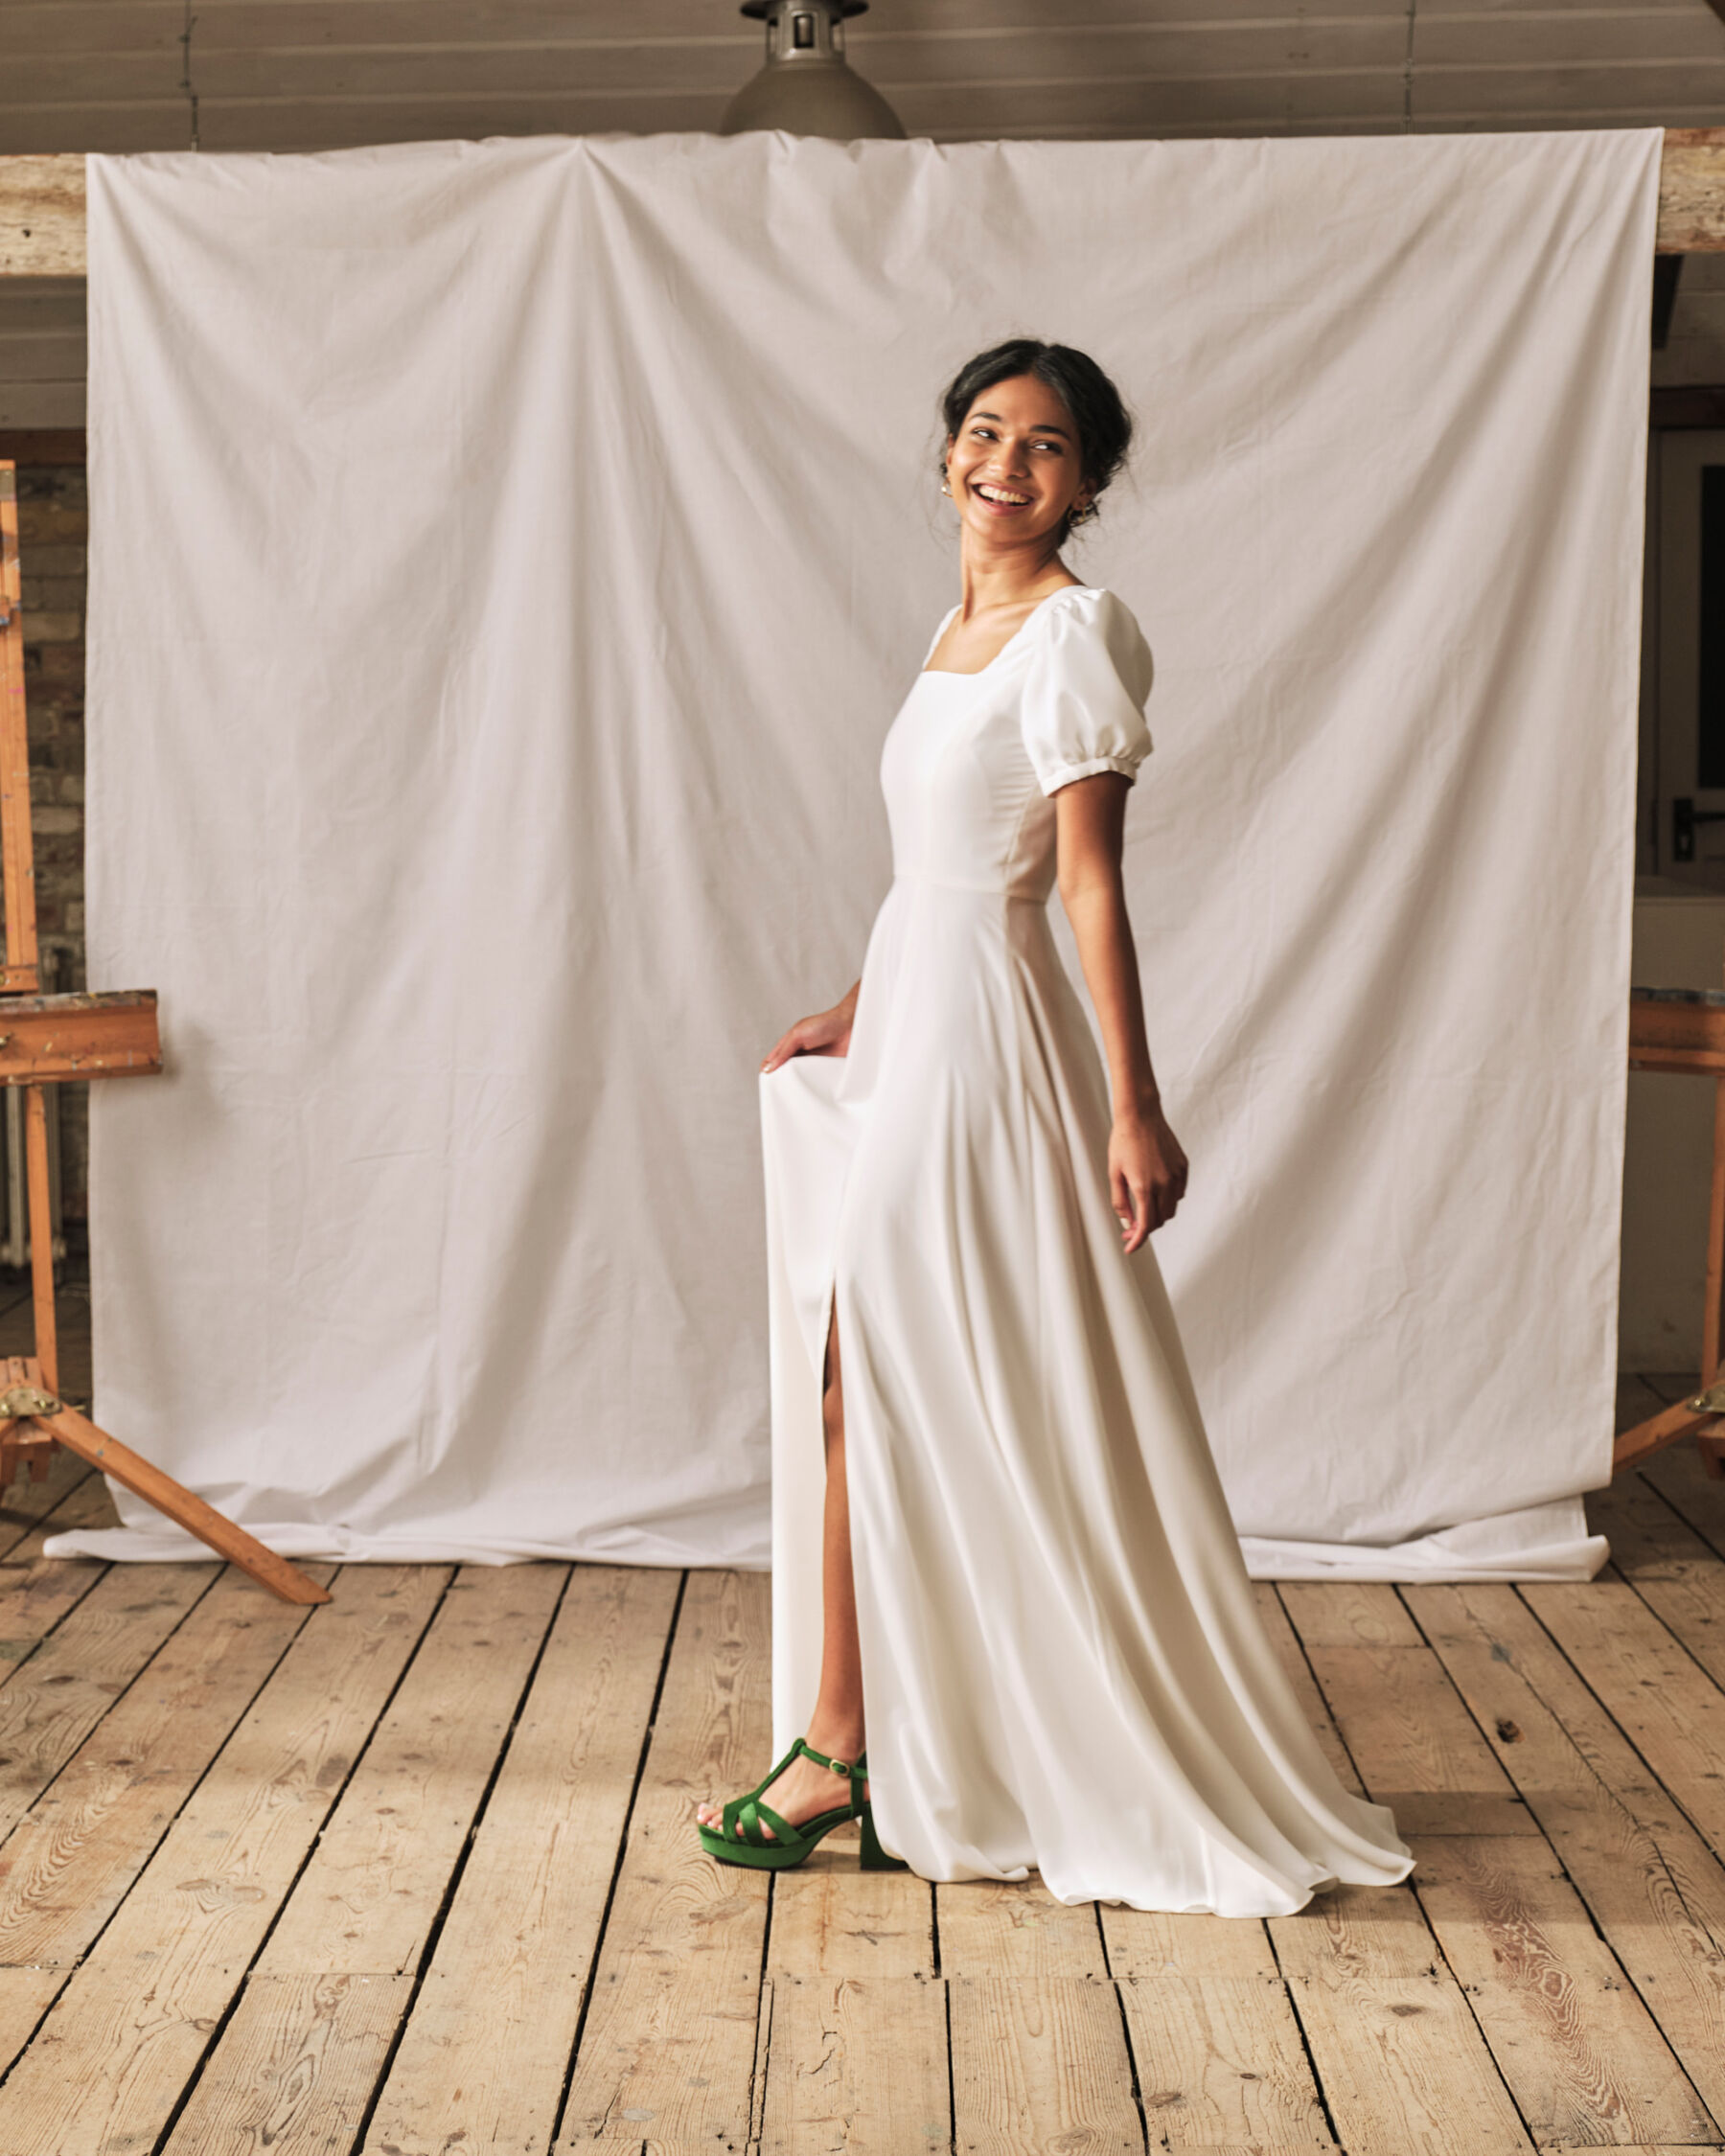 Elegant and simple wedding dress with subtle split from the knee and subtle puff sleeve, worn with green block heel wedding shoes. Dress by Sophie Rose Bridal.